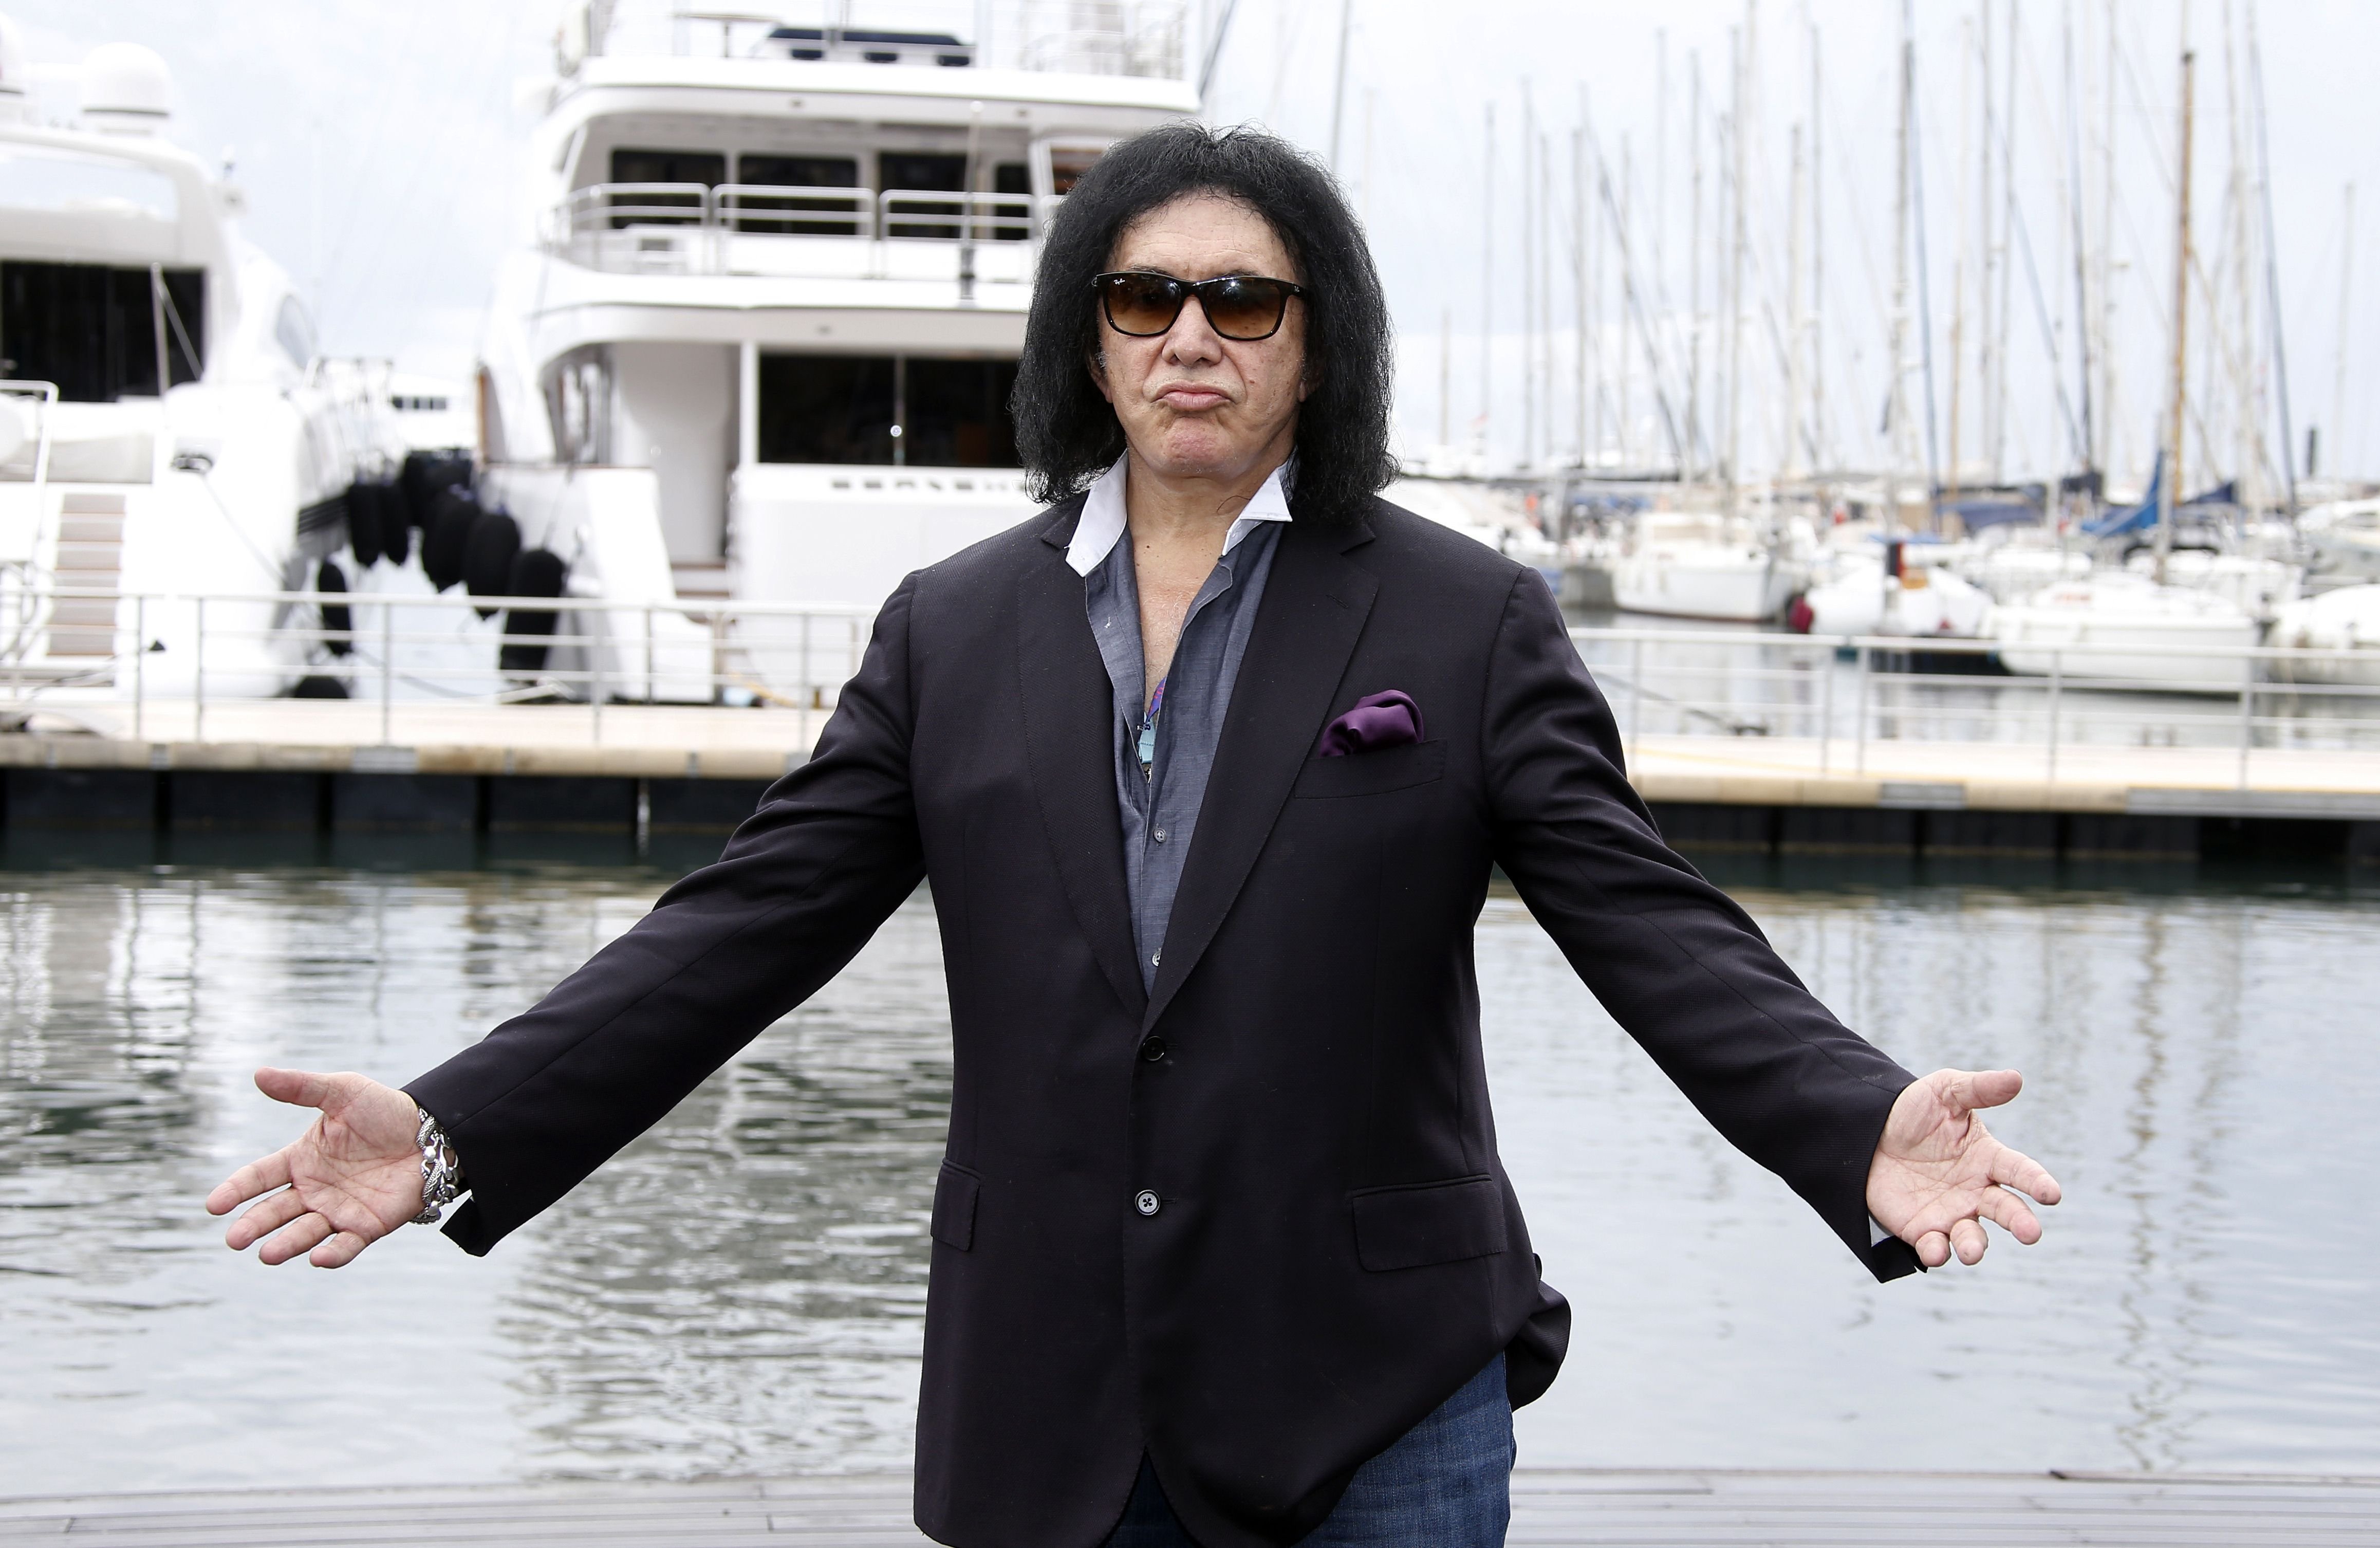 Israeli-US actor and musician, member of the band Kiss, Gene Simmons poses during a photocall for the TV serie "Gene Simmons" as part of the MIPCOM, on Oct. 14, 2014 in Cannes, southeastern France. (Valery Hache—AFP/Getty Images)